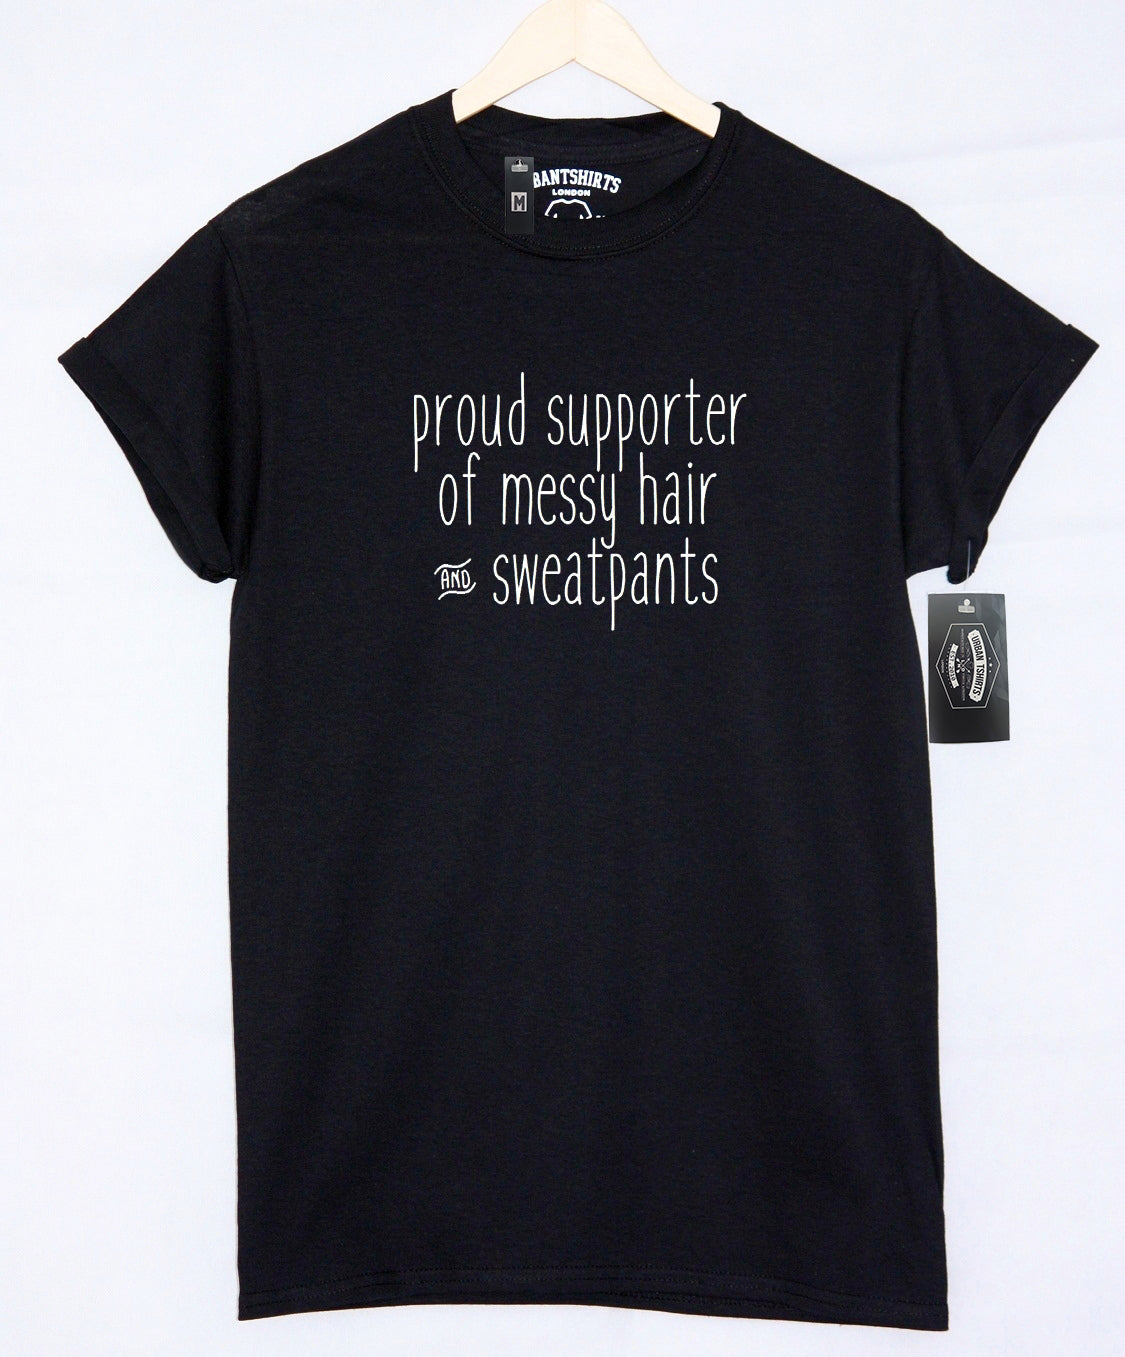 Proud supporter of messy hair and sweatpants T-shirt - Urbantshirts.co.uk